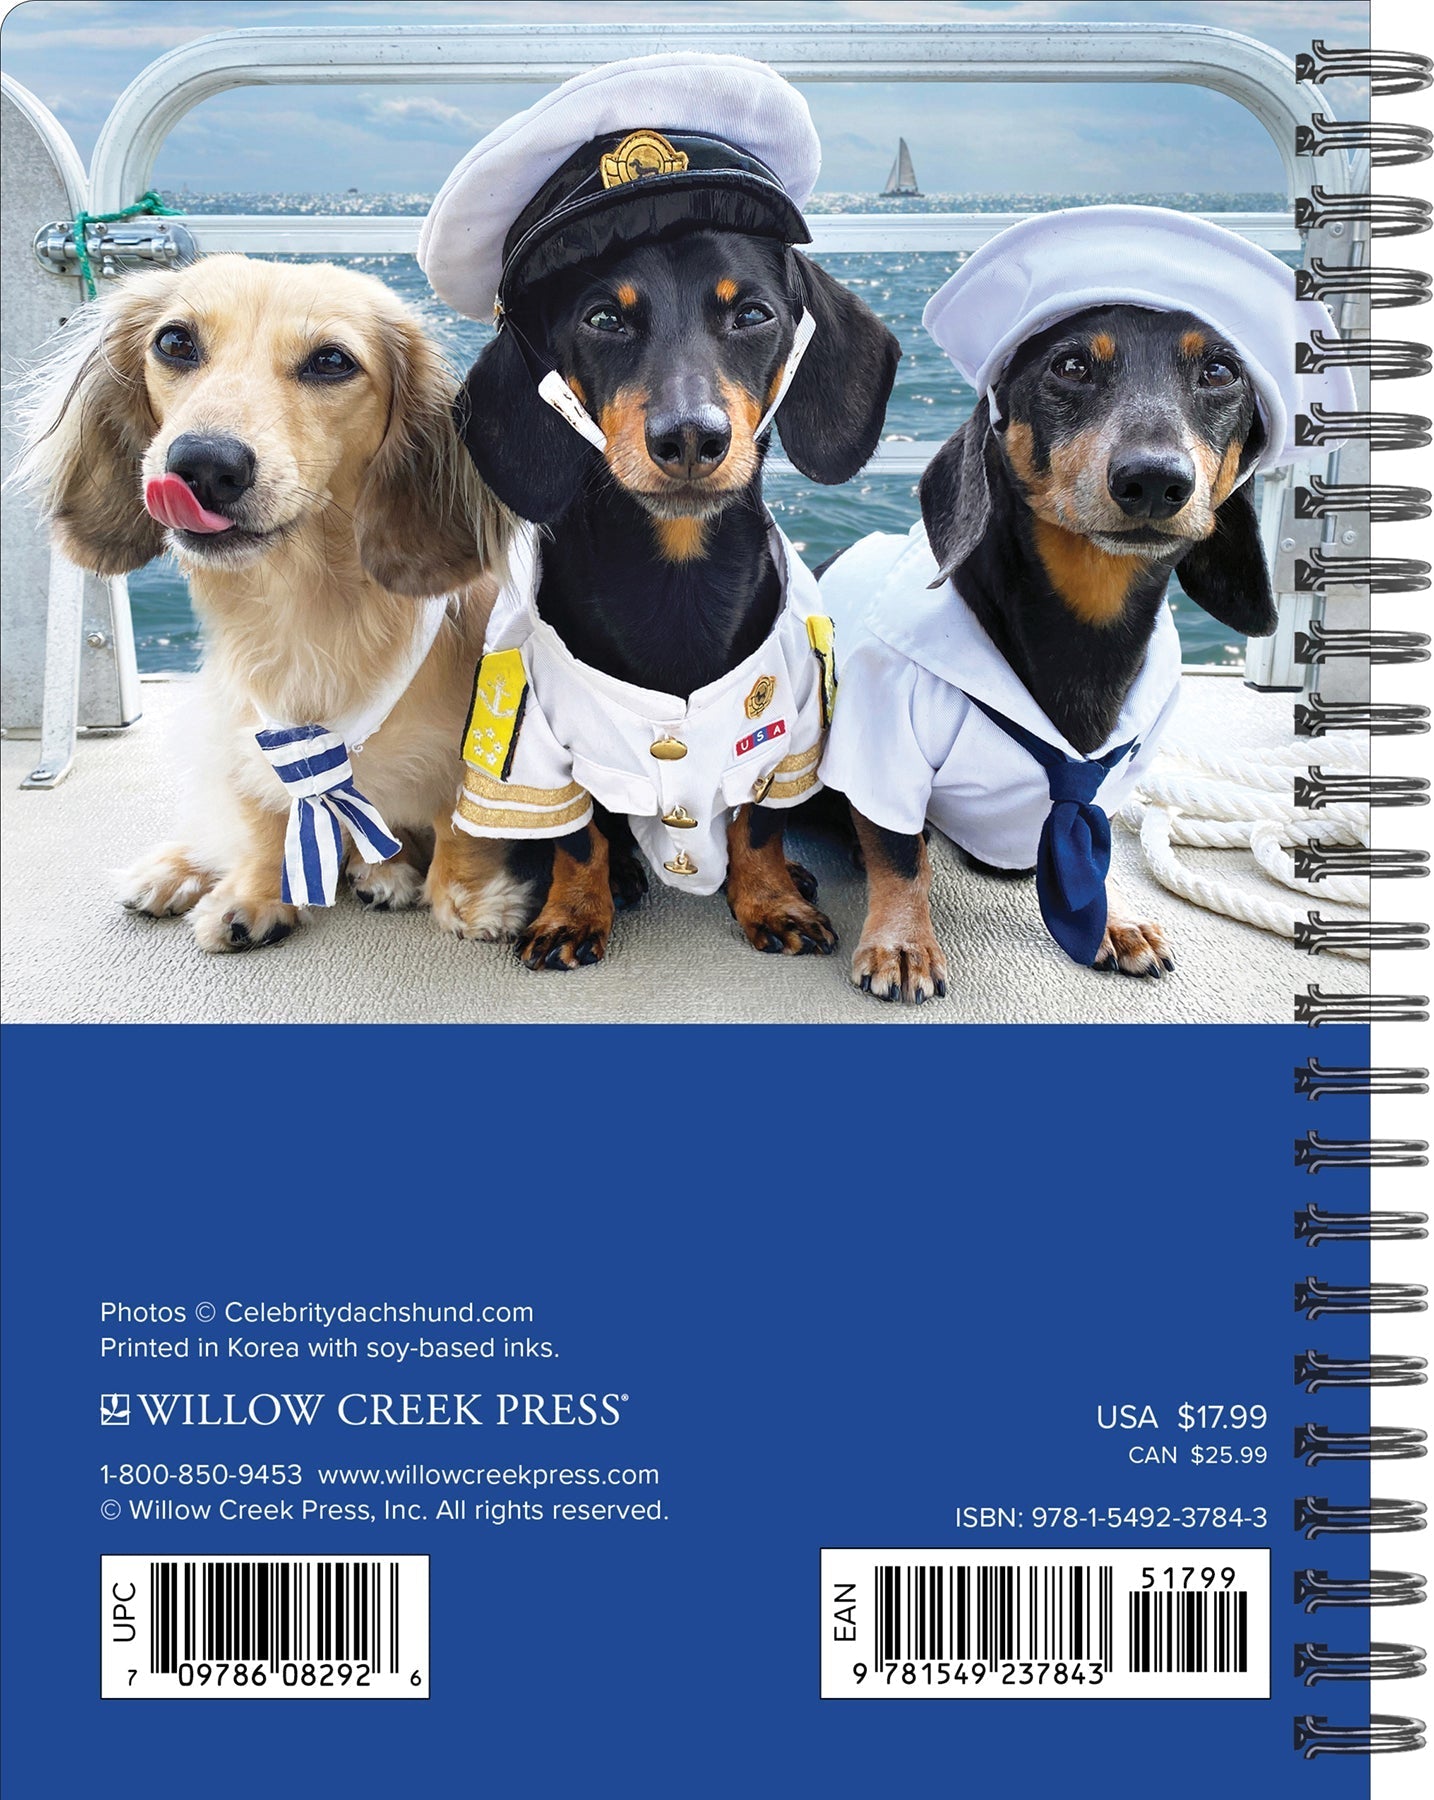 2024 Crusoe the Celebrity Dachshund - Weekly Planner Diary